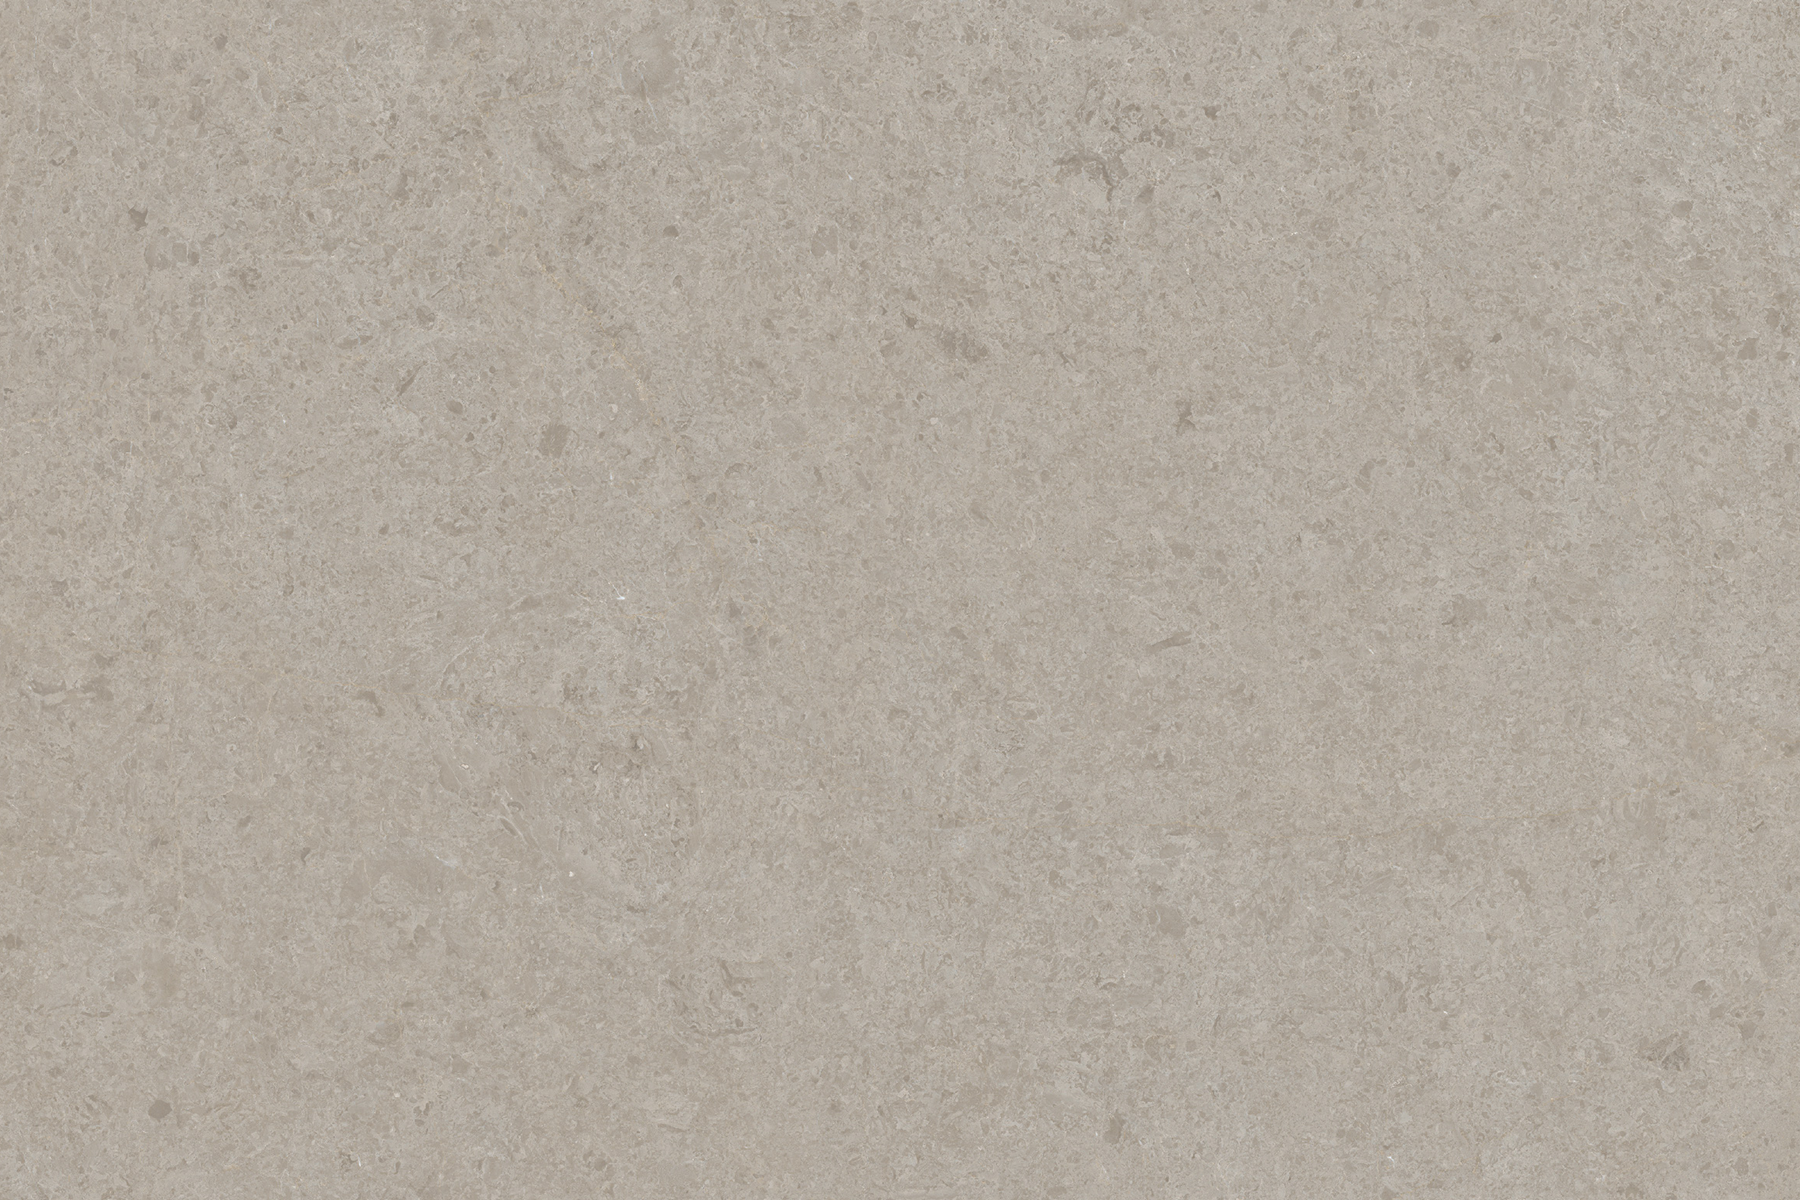 New Sintered Stone Ultraman Concise Grey Artificial Stone